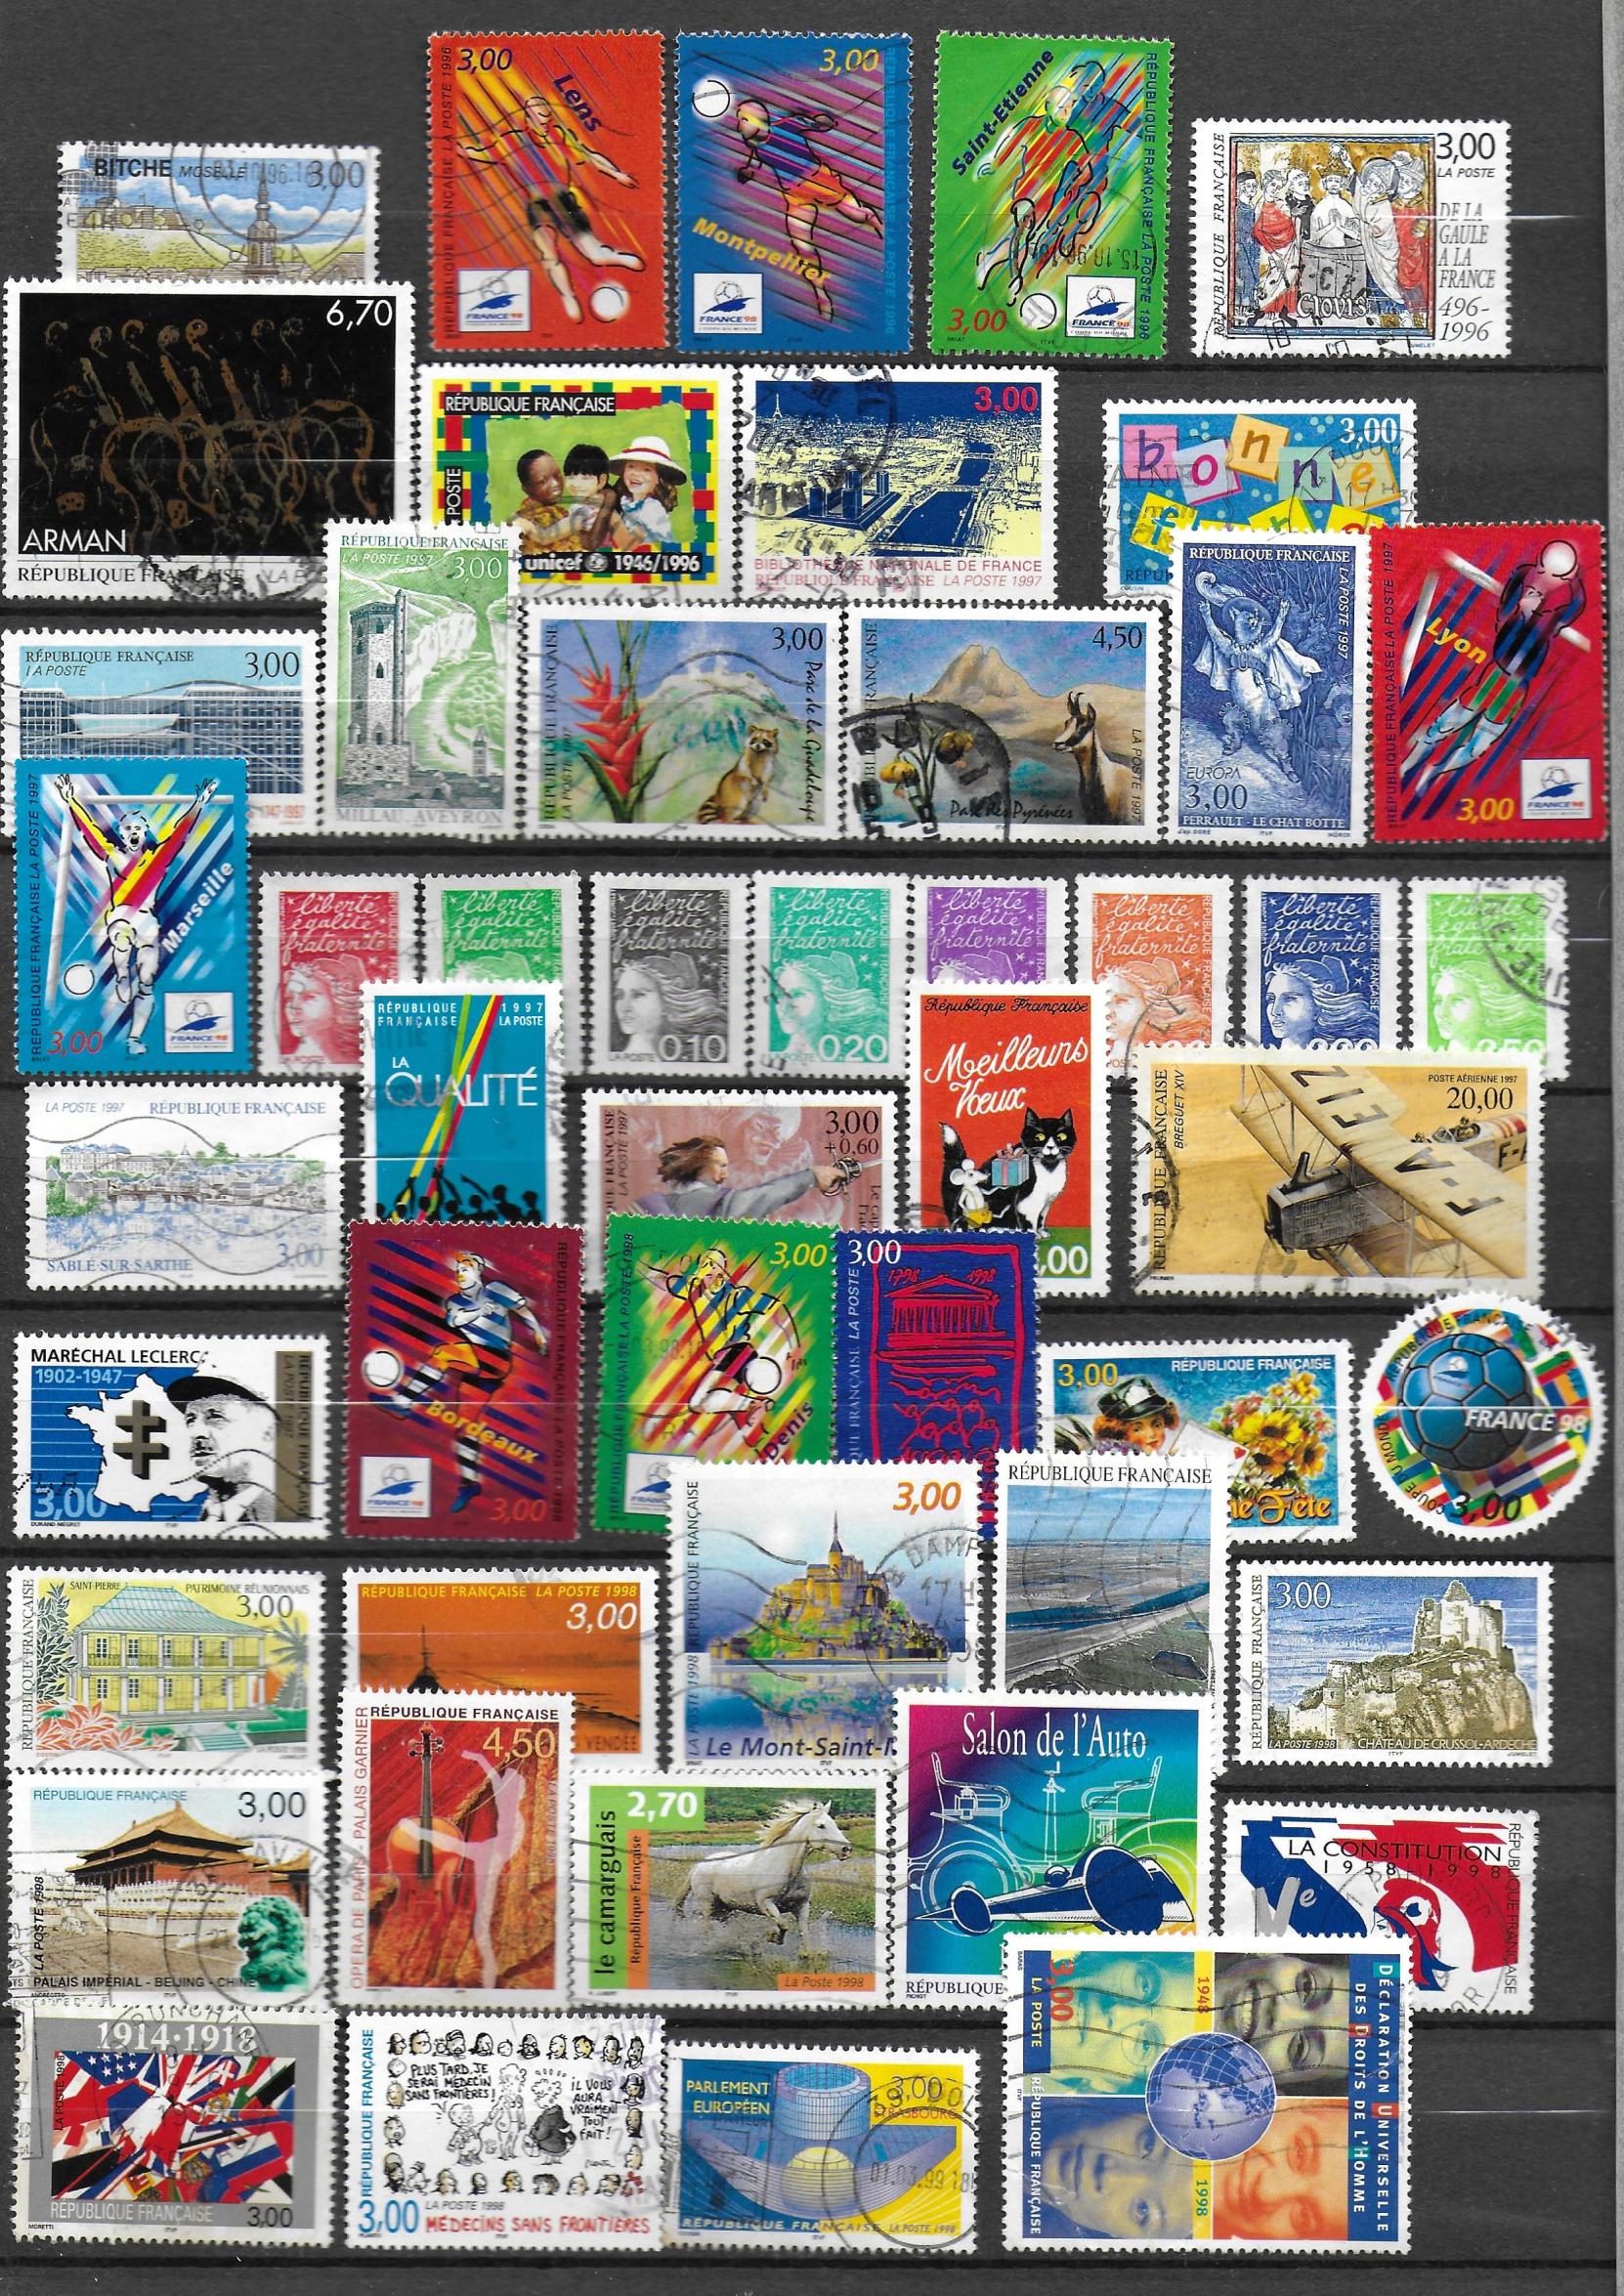 Timbres France 6 - Copie.jpg